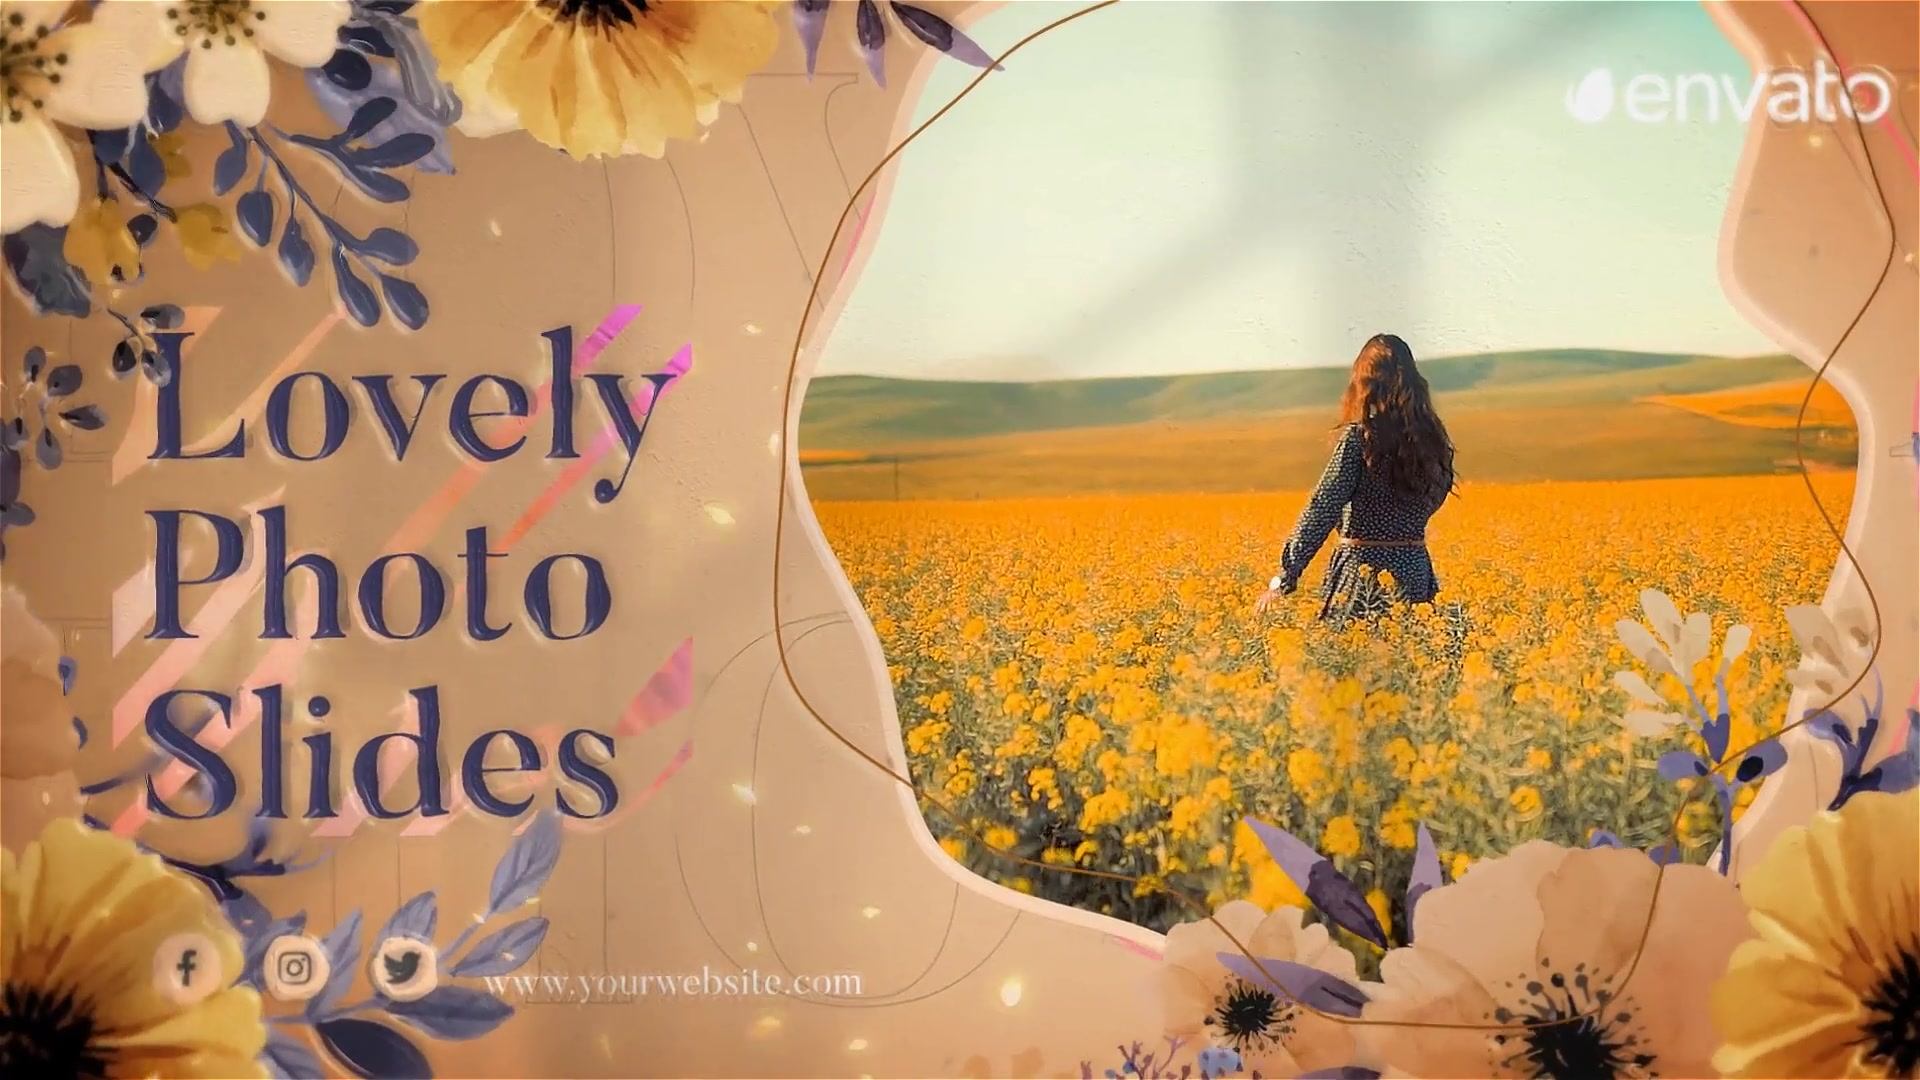 romantic memories slideshow after effects template free download